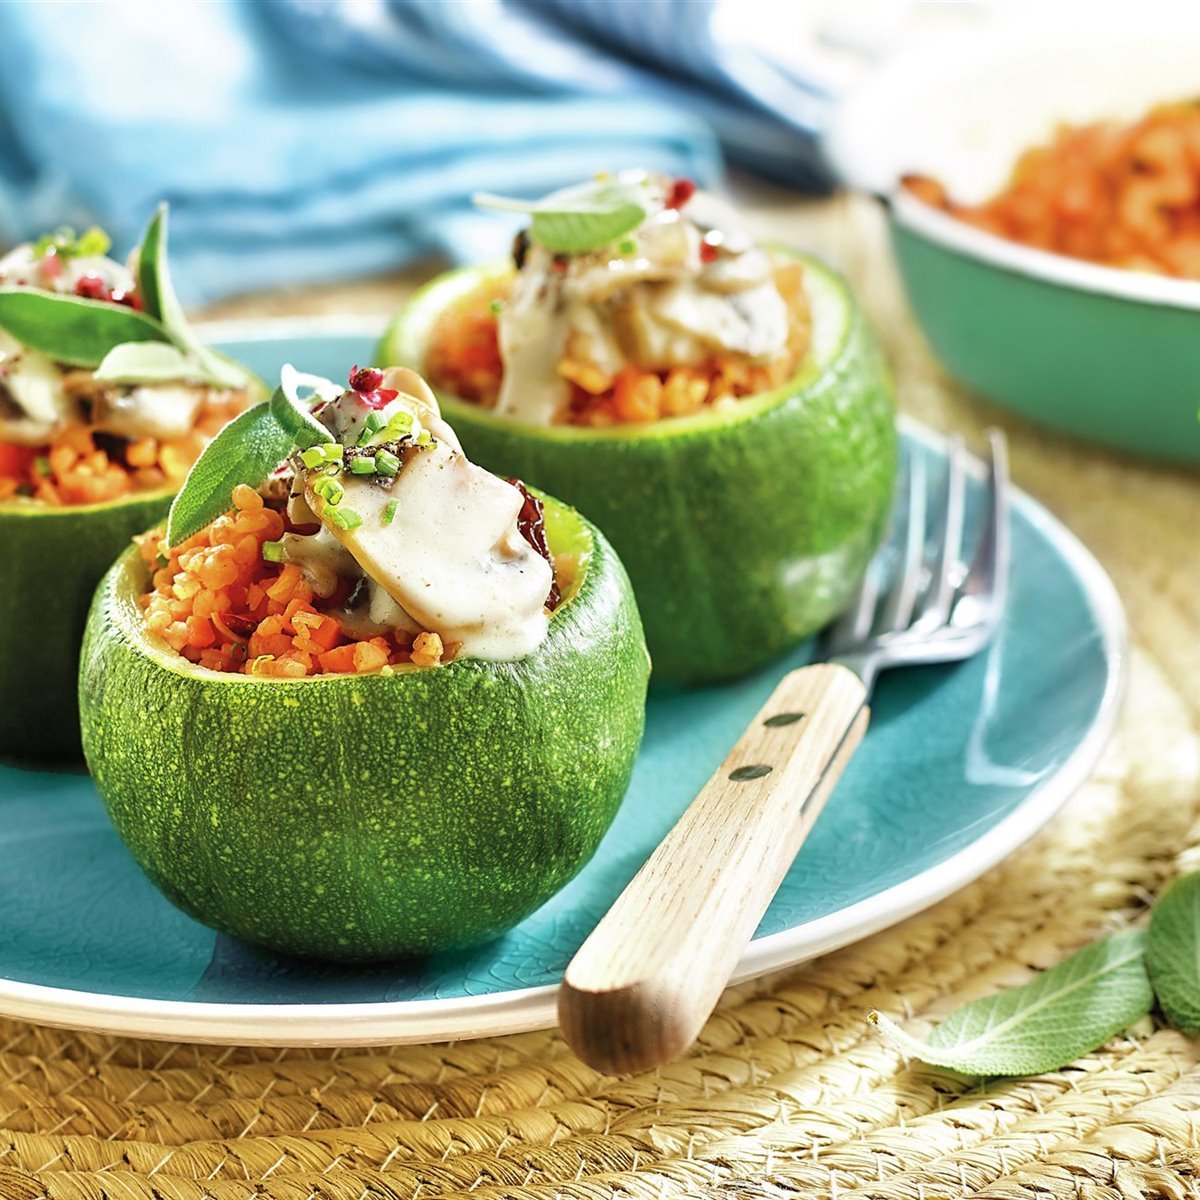 Courgettes stuffed with couscous and mushrooms